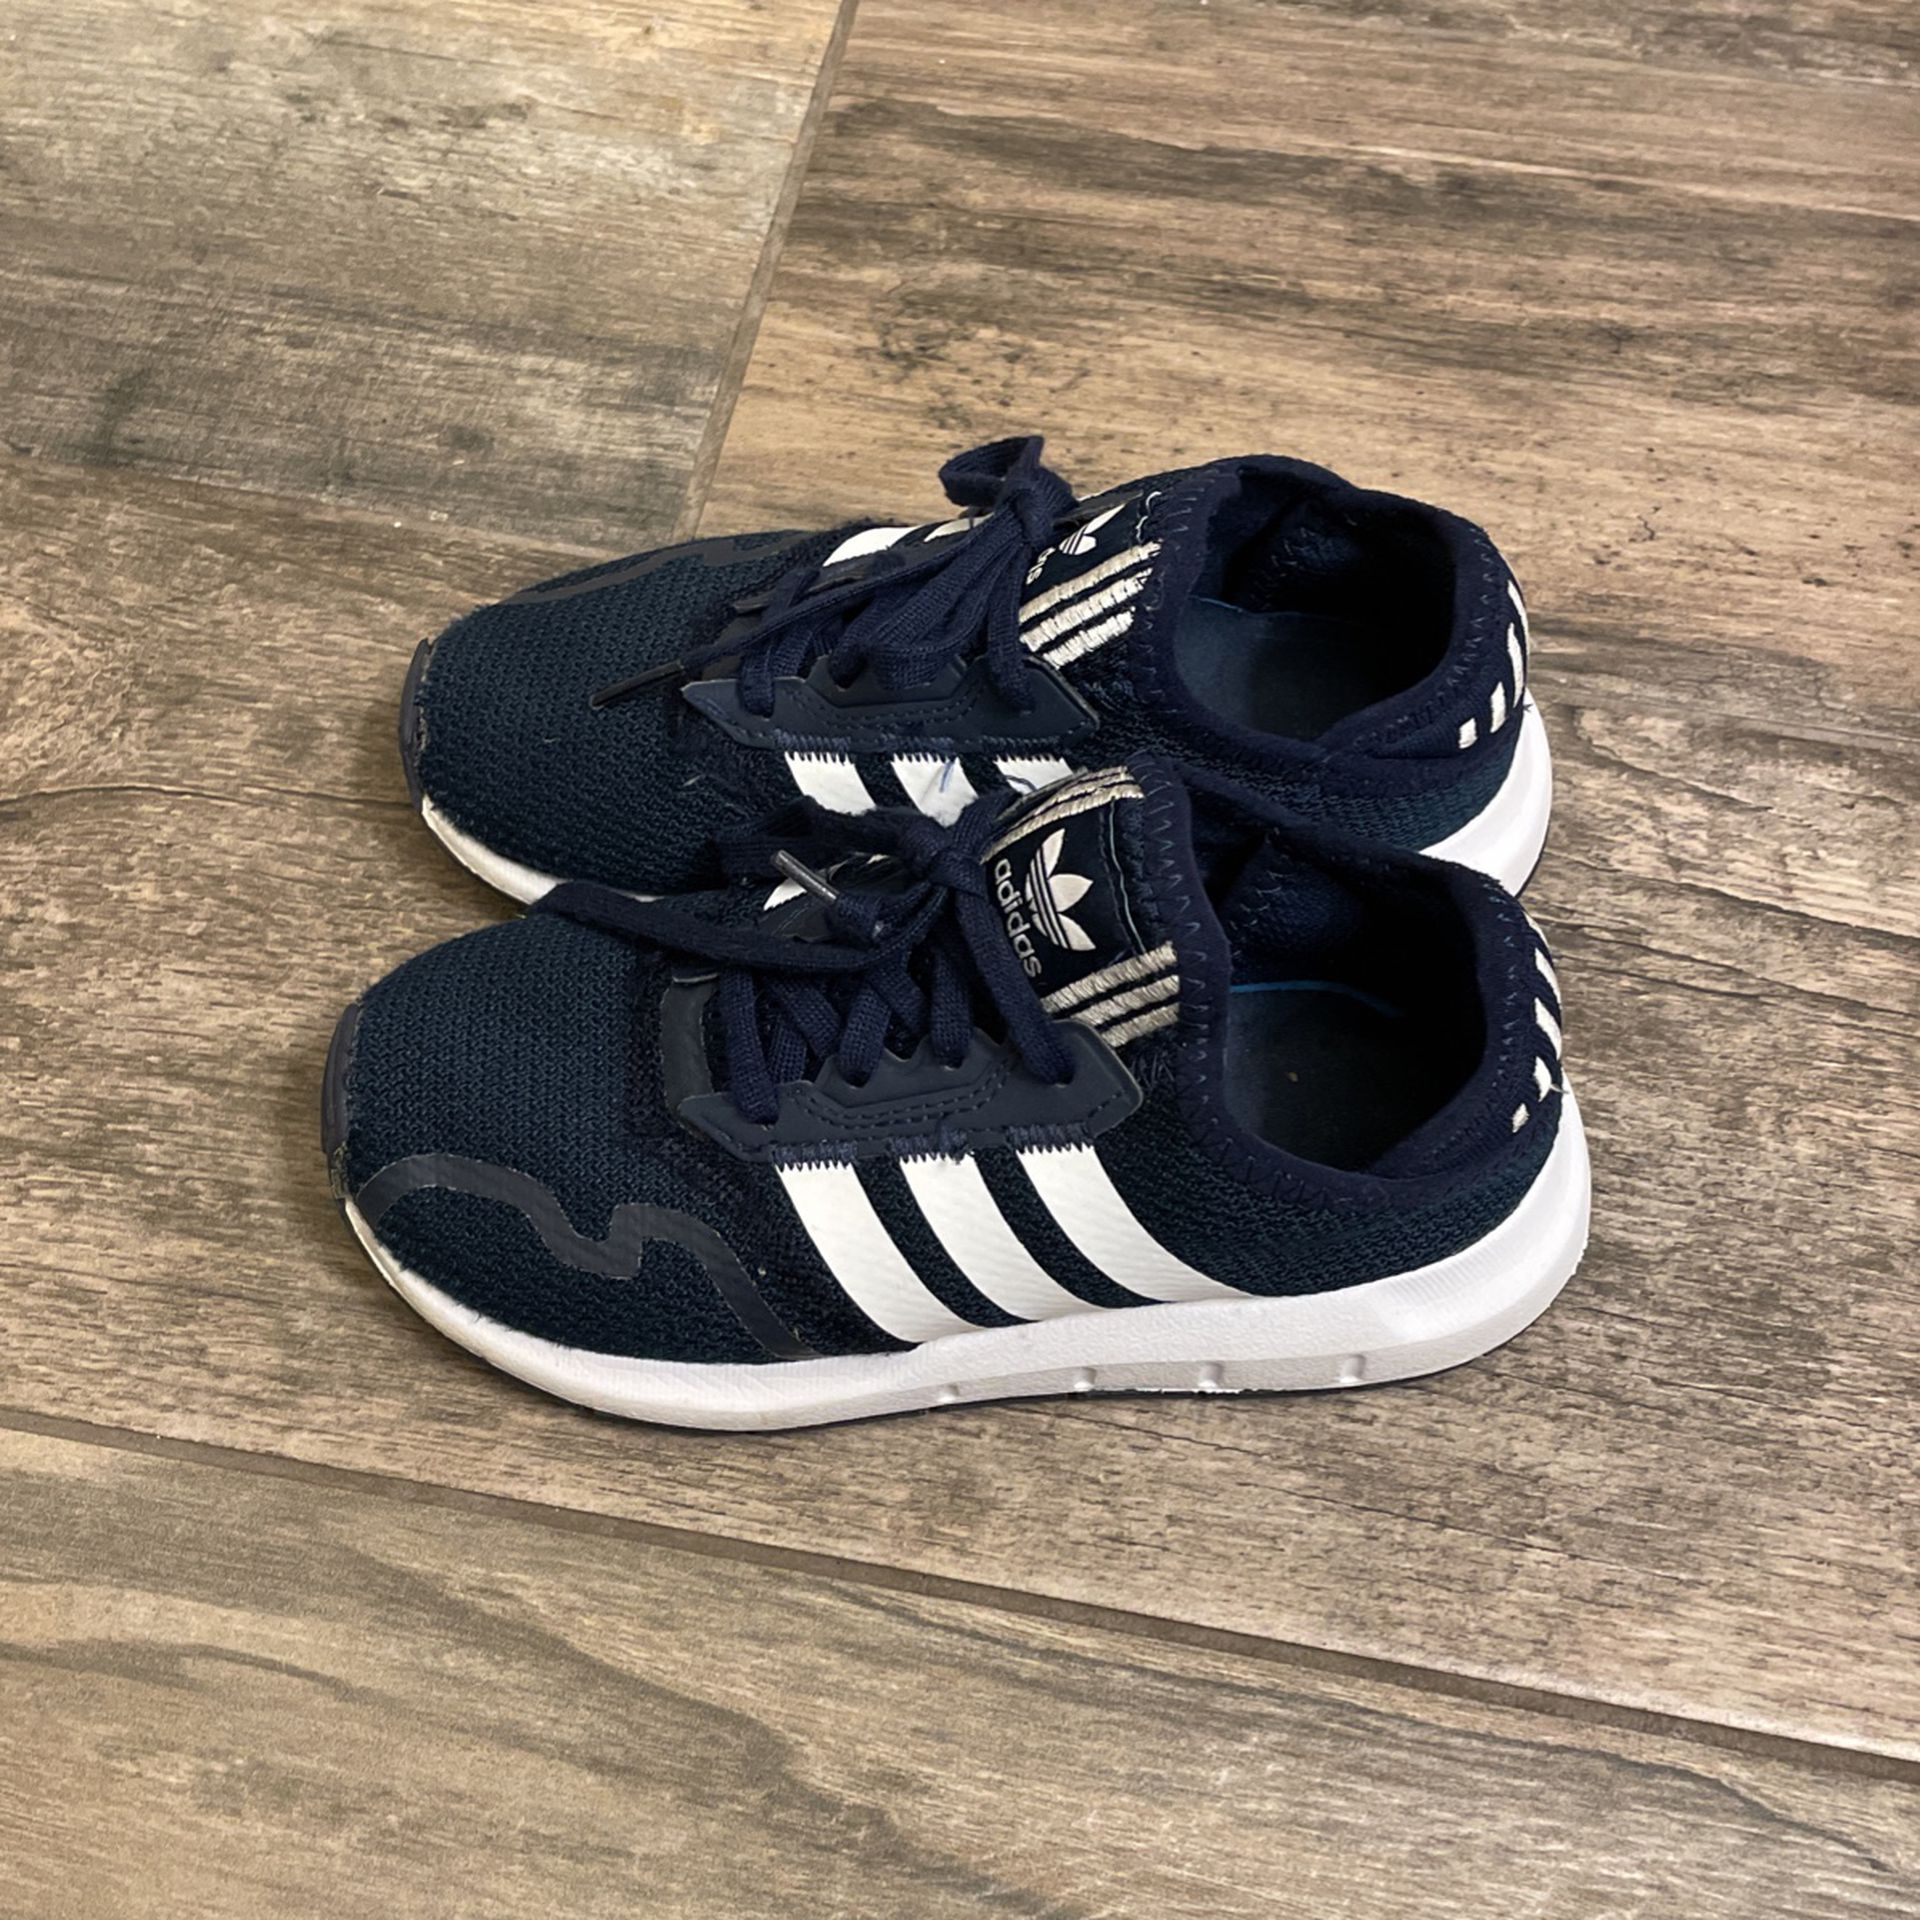 Adidas Shoes Size 13k for Sale in Peoria, OfferUp